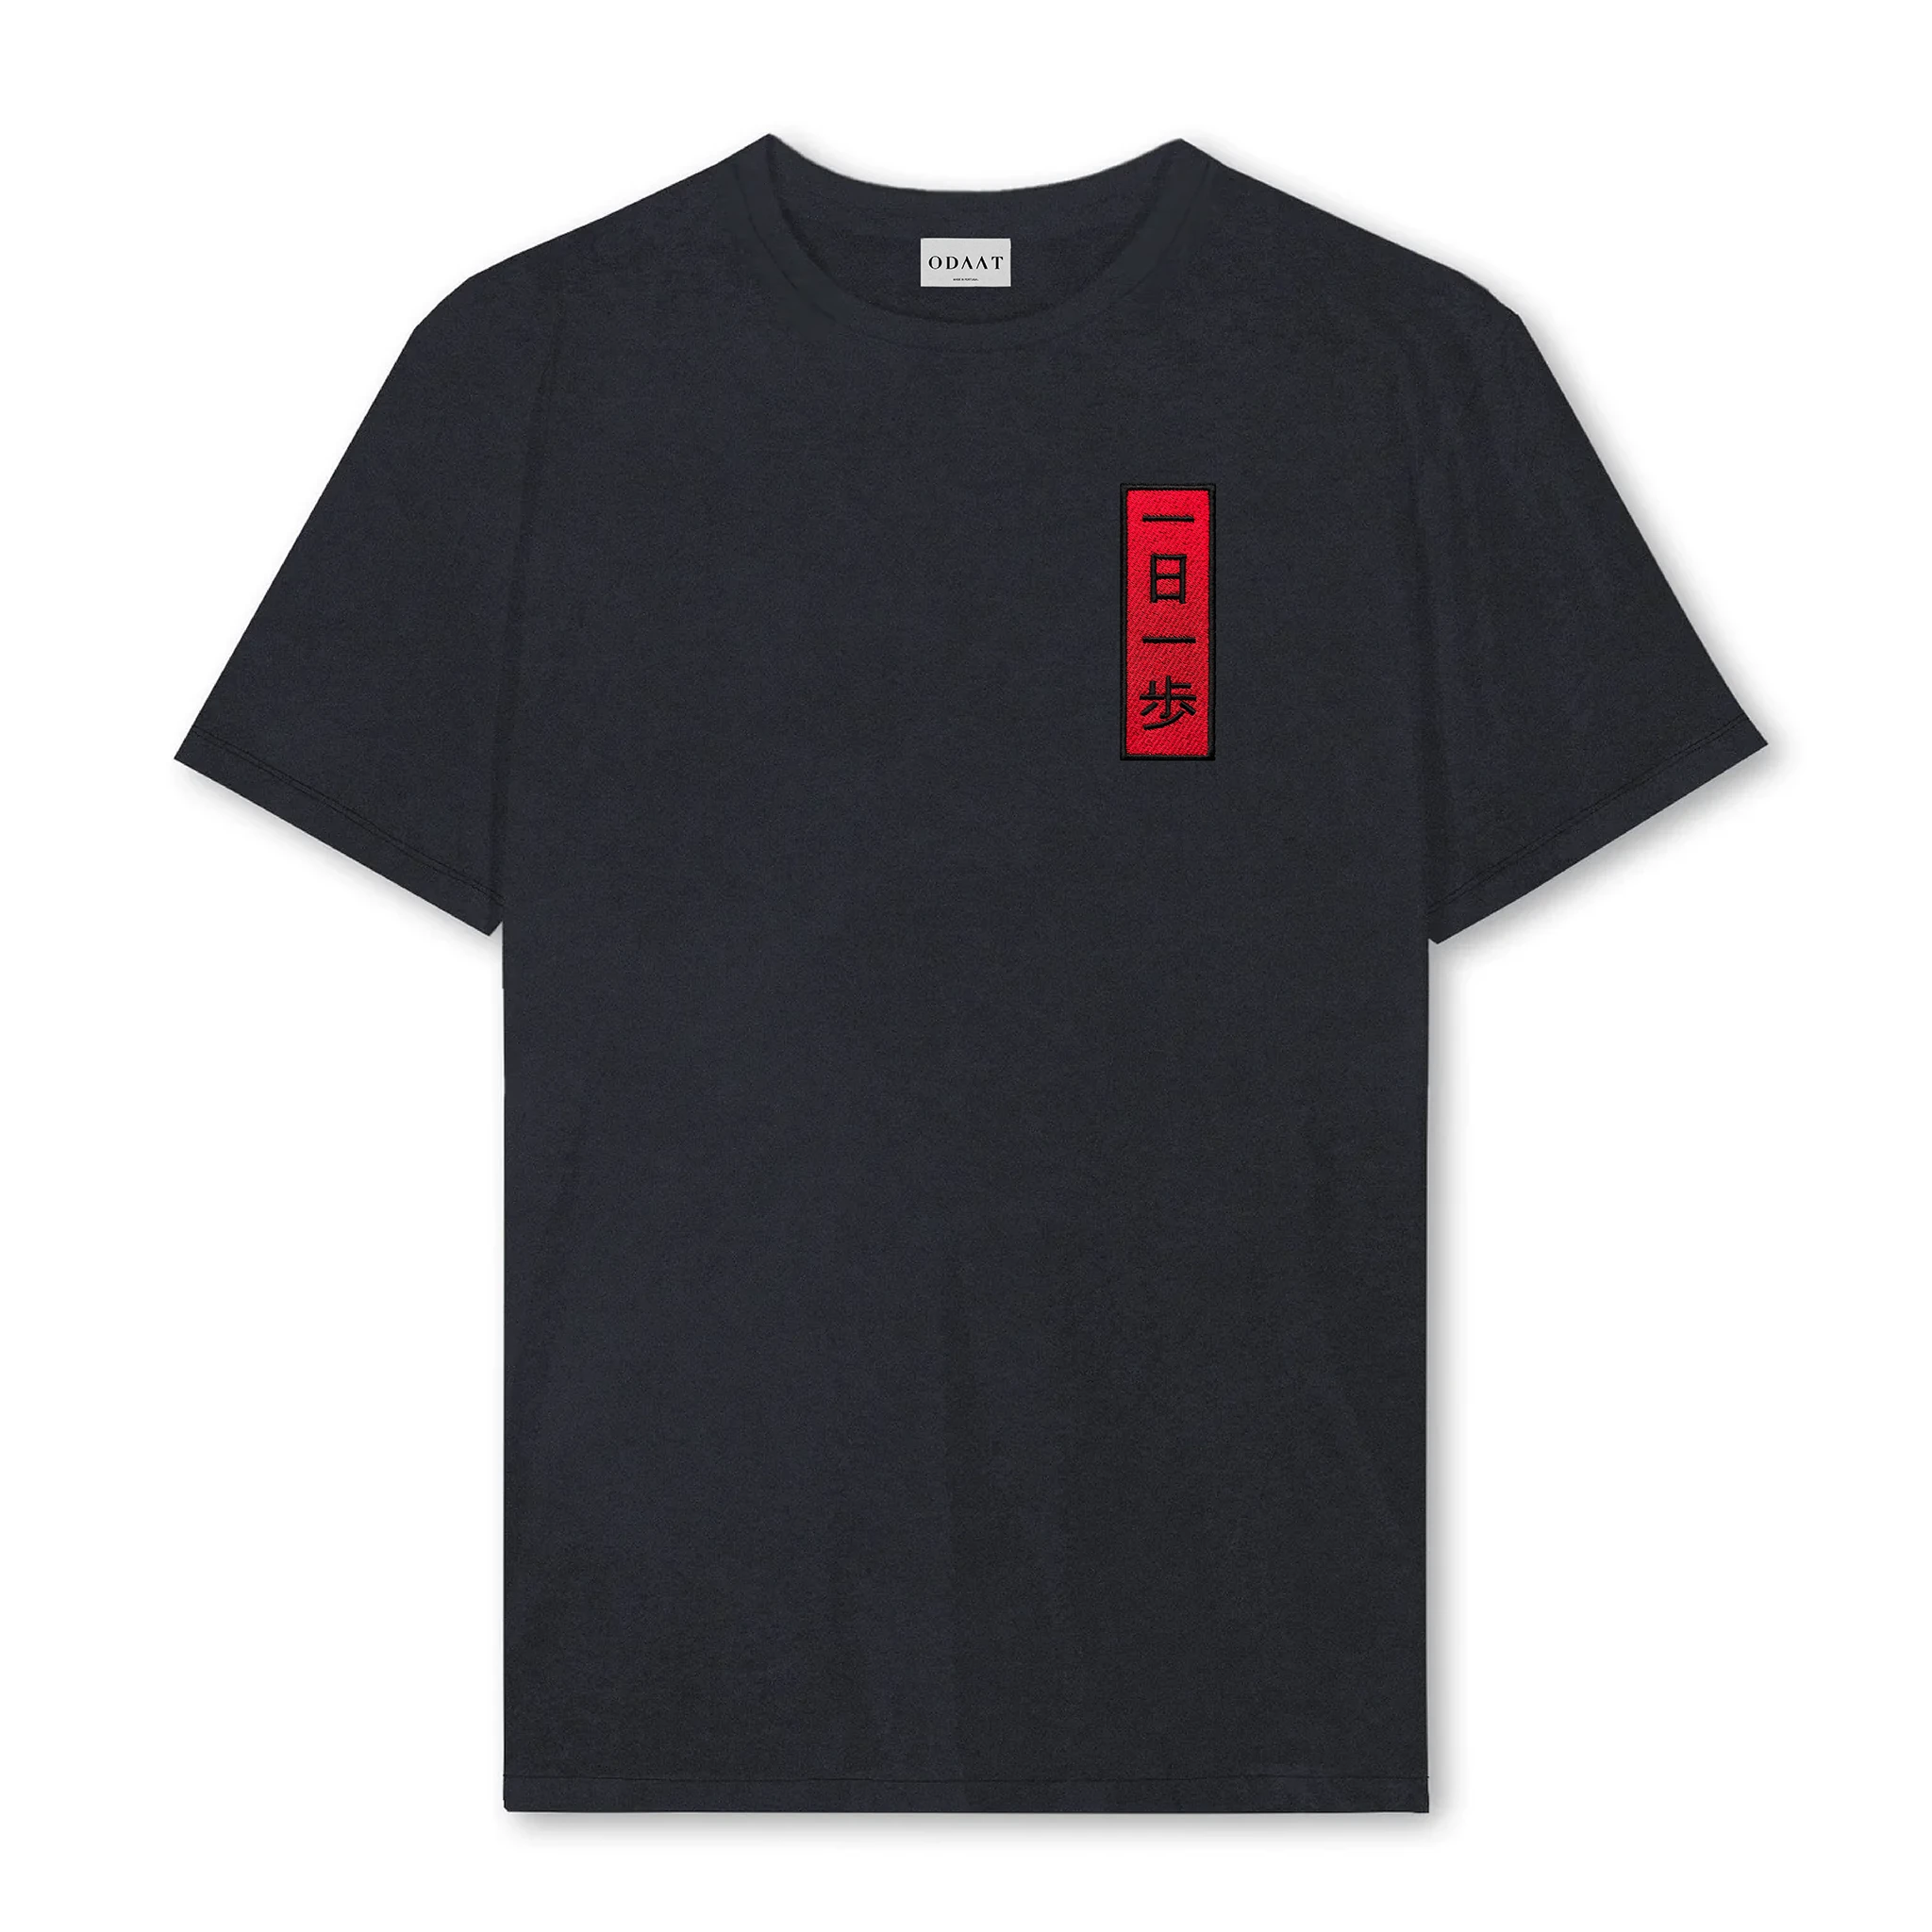 ODAAT Apparel, KyoPace T-Shirt in Vintage Black featuring red embroidered patch that says "One Day, One Step" in Japanese vertically on the left chest. 